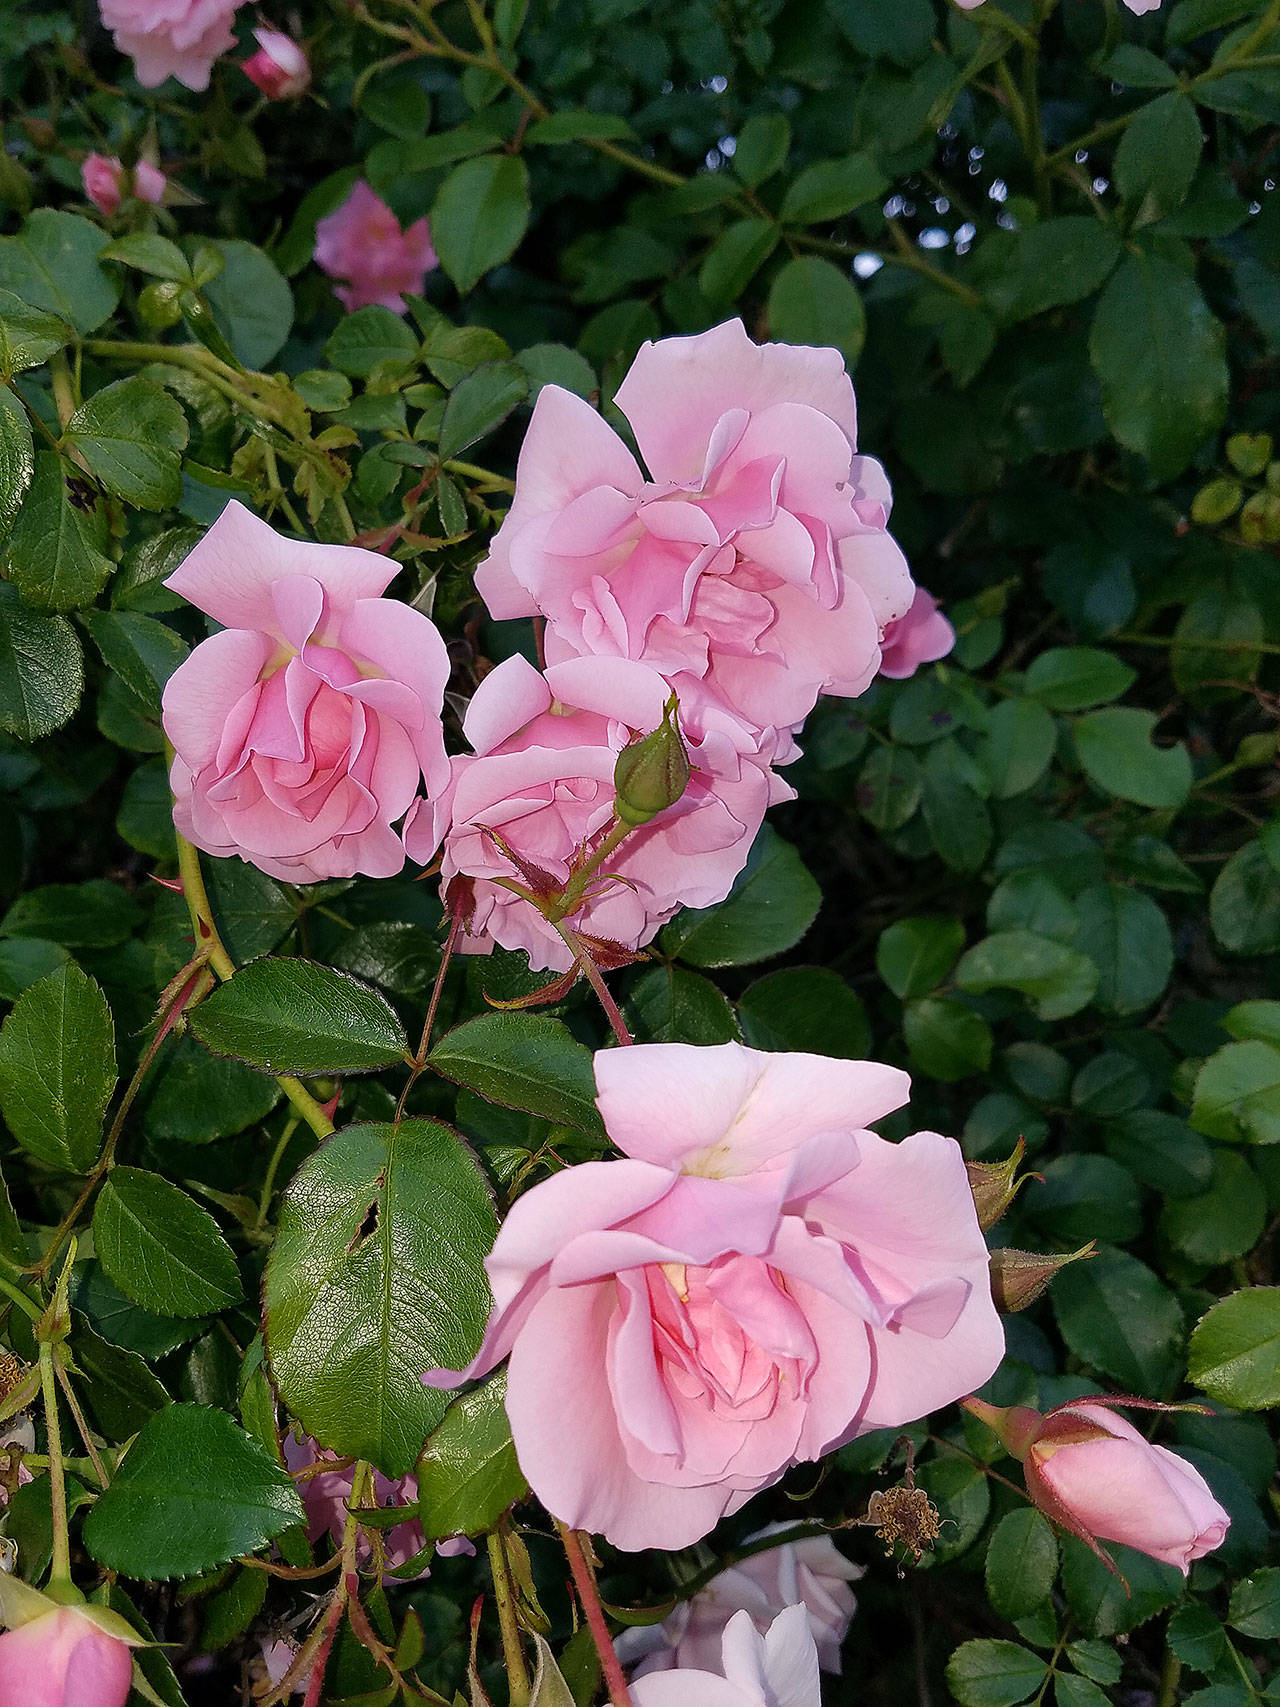 Baby Blanket rose is noted for its pink flowers, resistance to common rose diseases, compact spreading habit and rapid repeat bloom. (Photo by Sandra Schumacher)